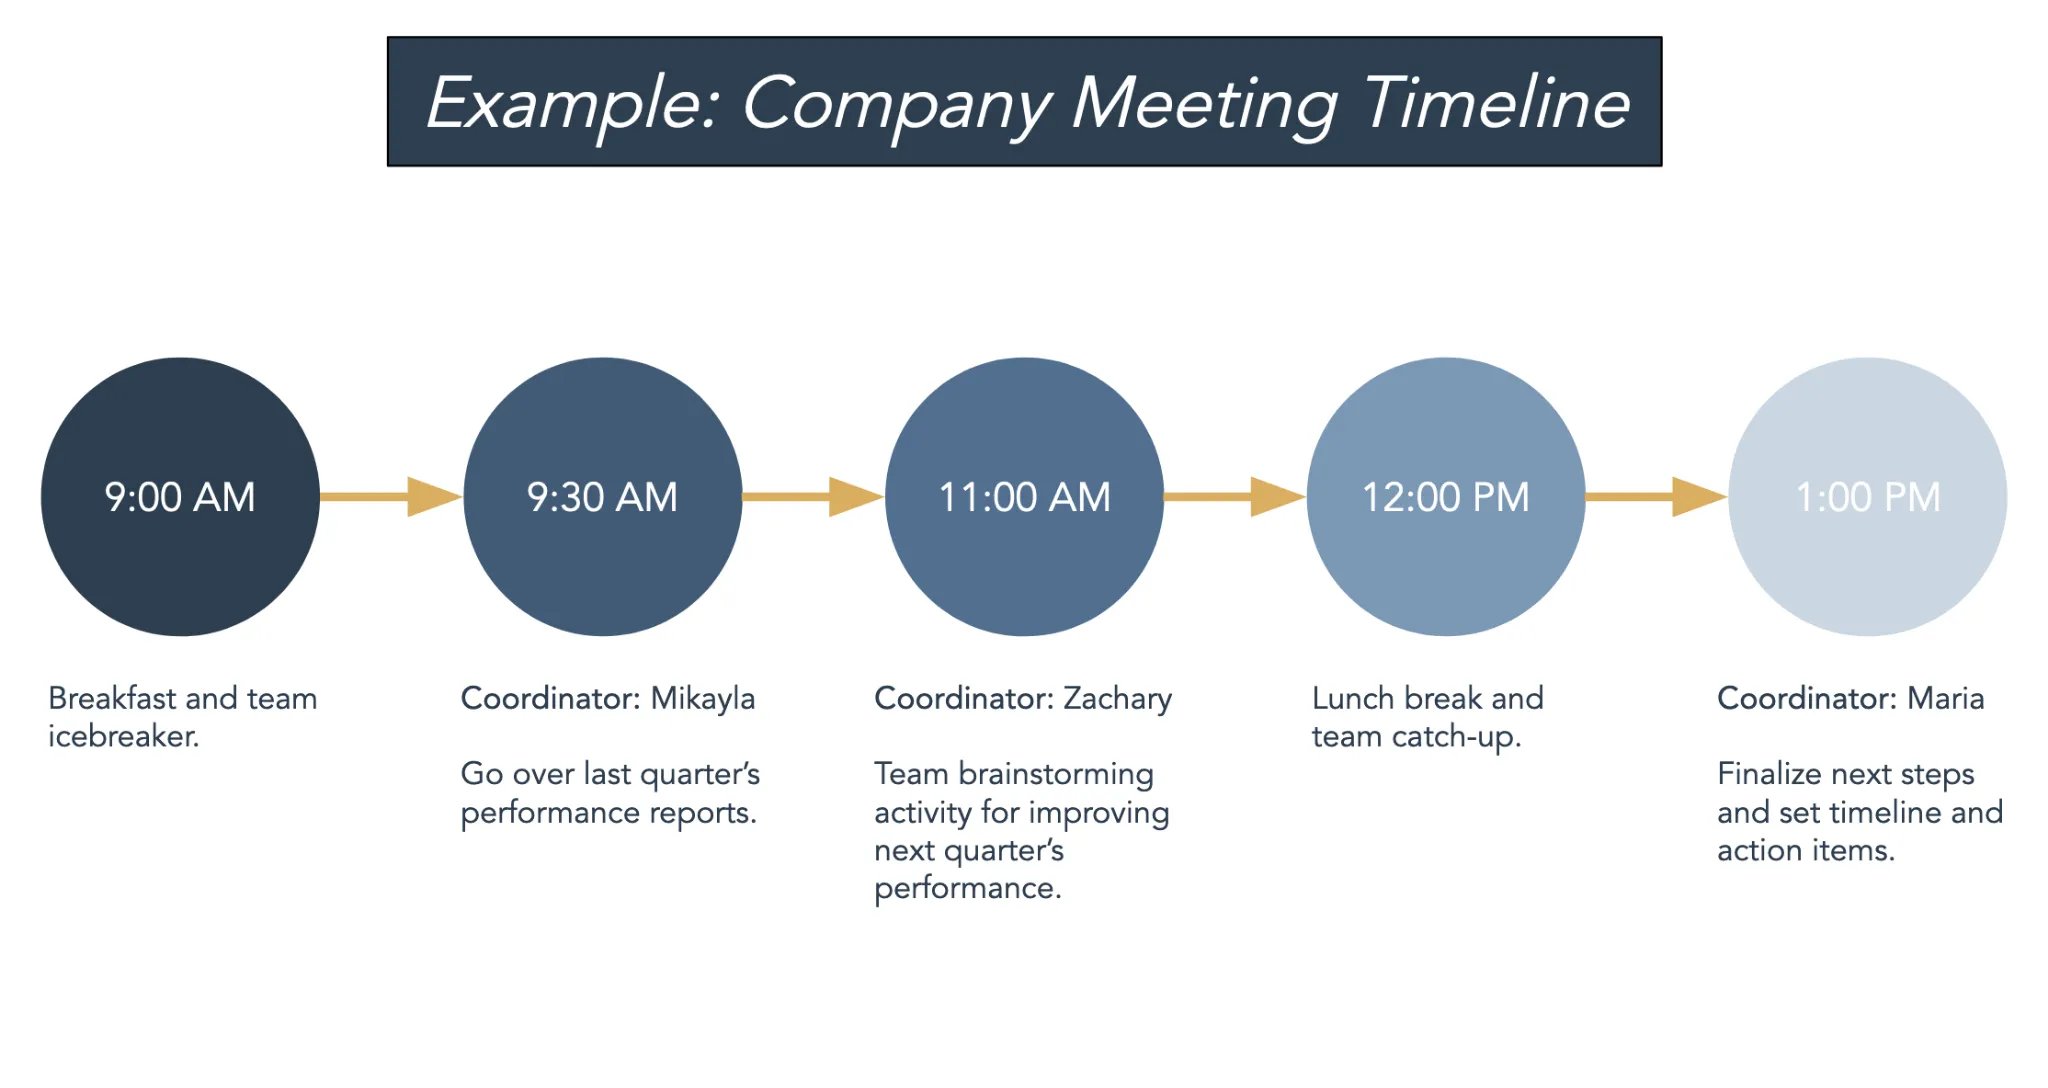 How to create an effective project timeline in 2021